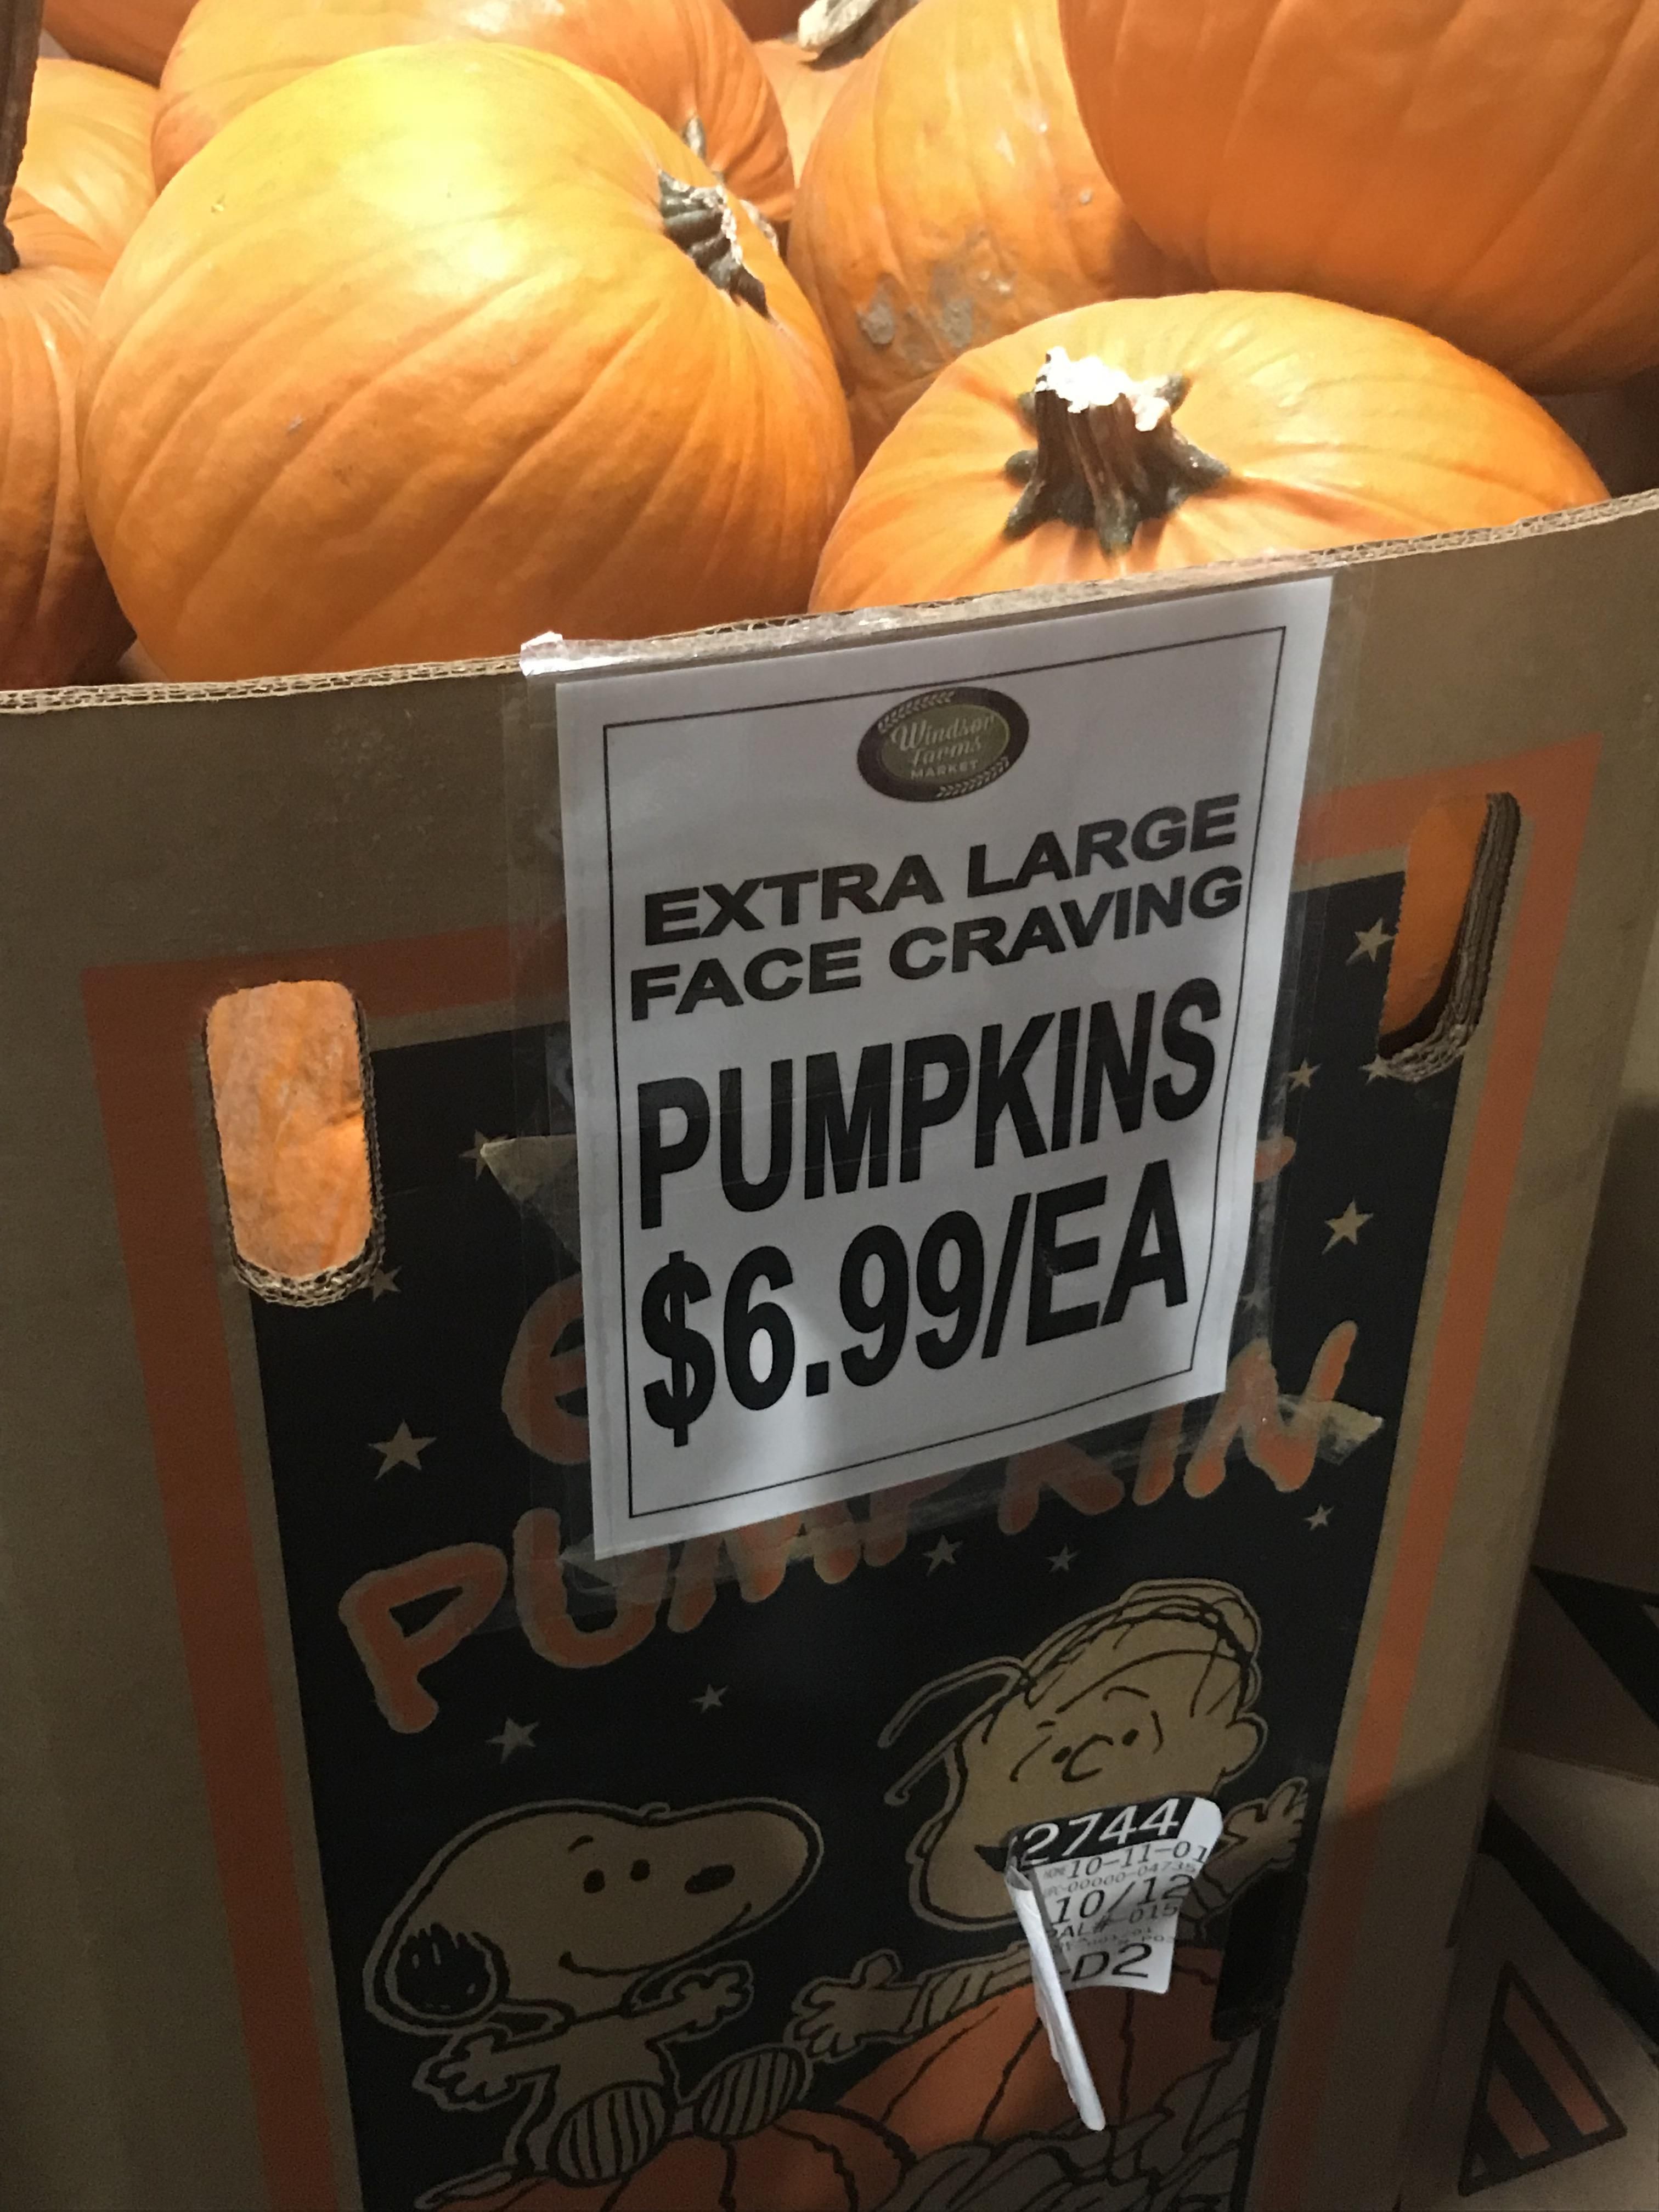 The pumpkins at my local grocery store have an unholy desire.